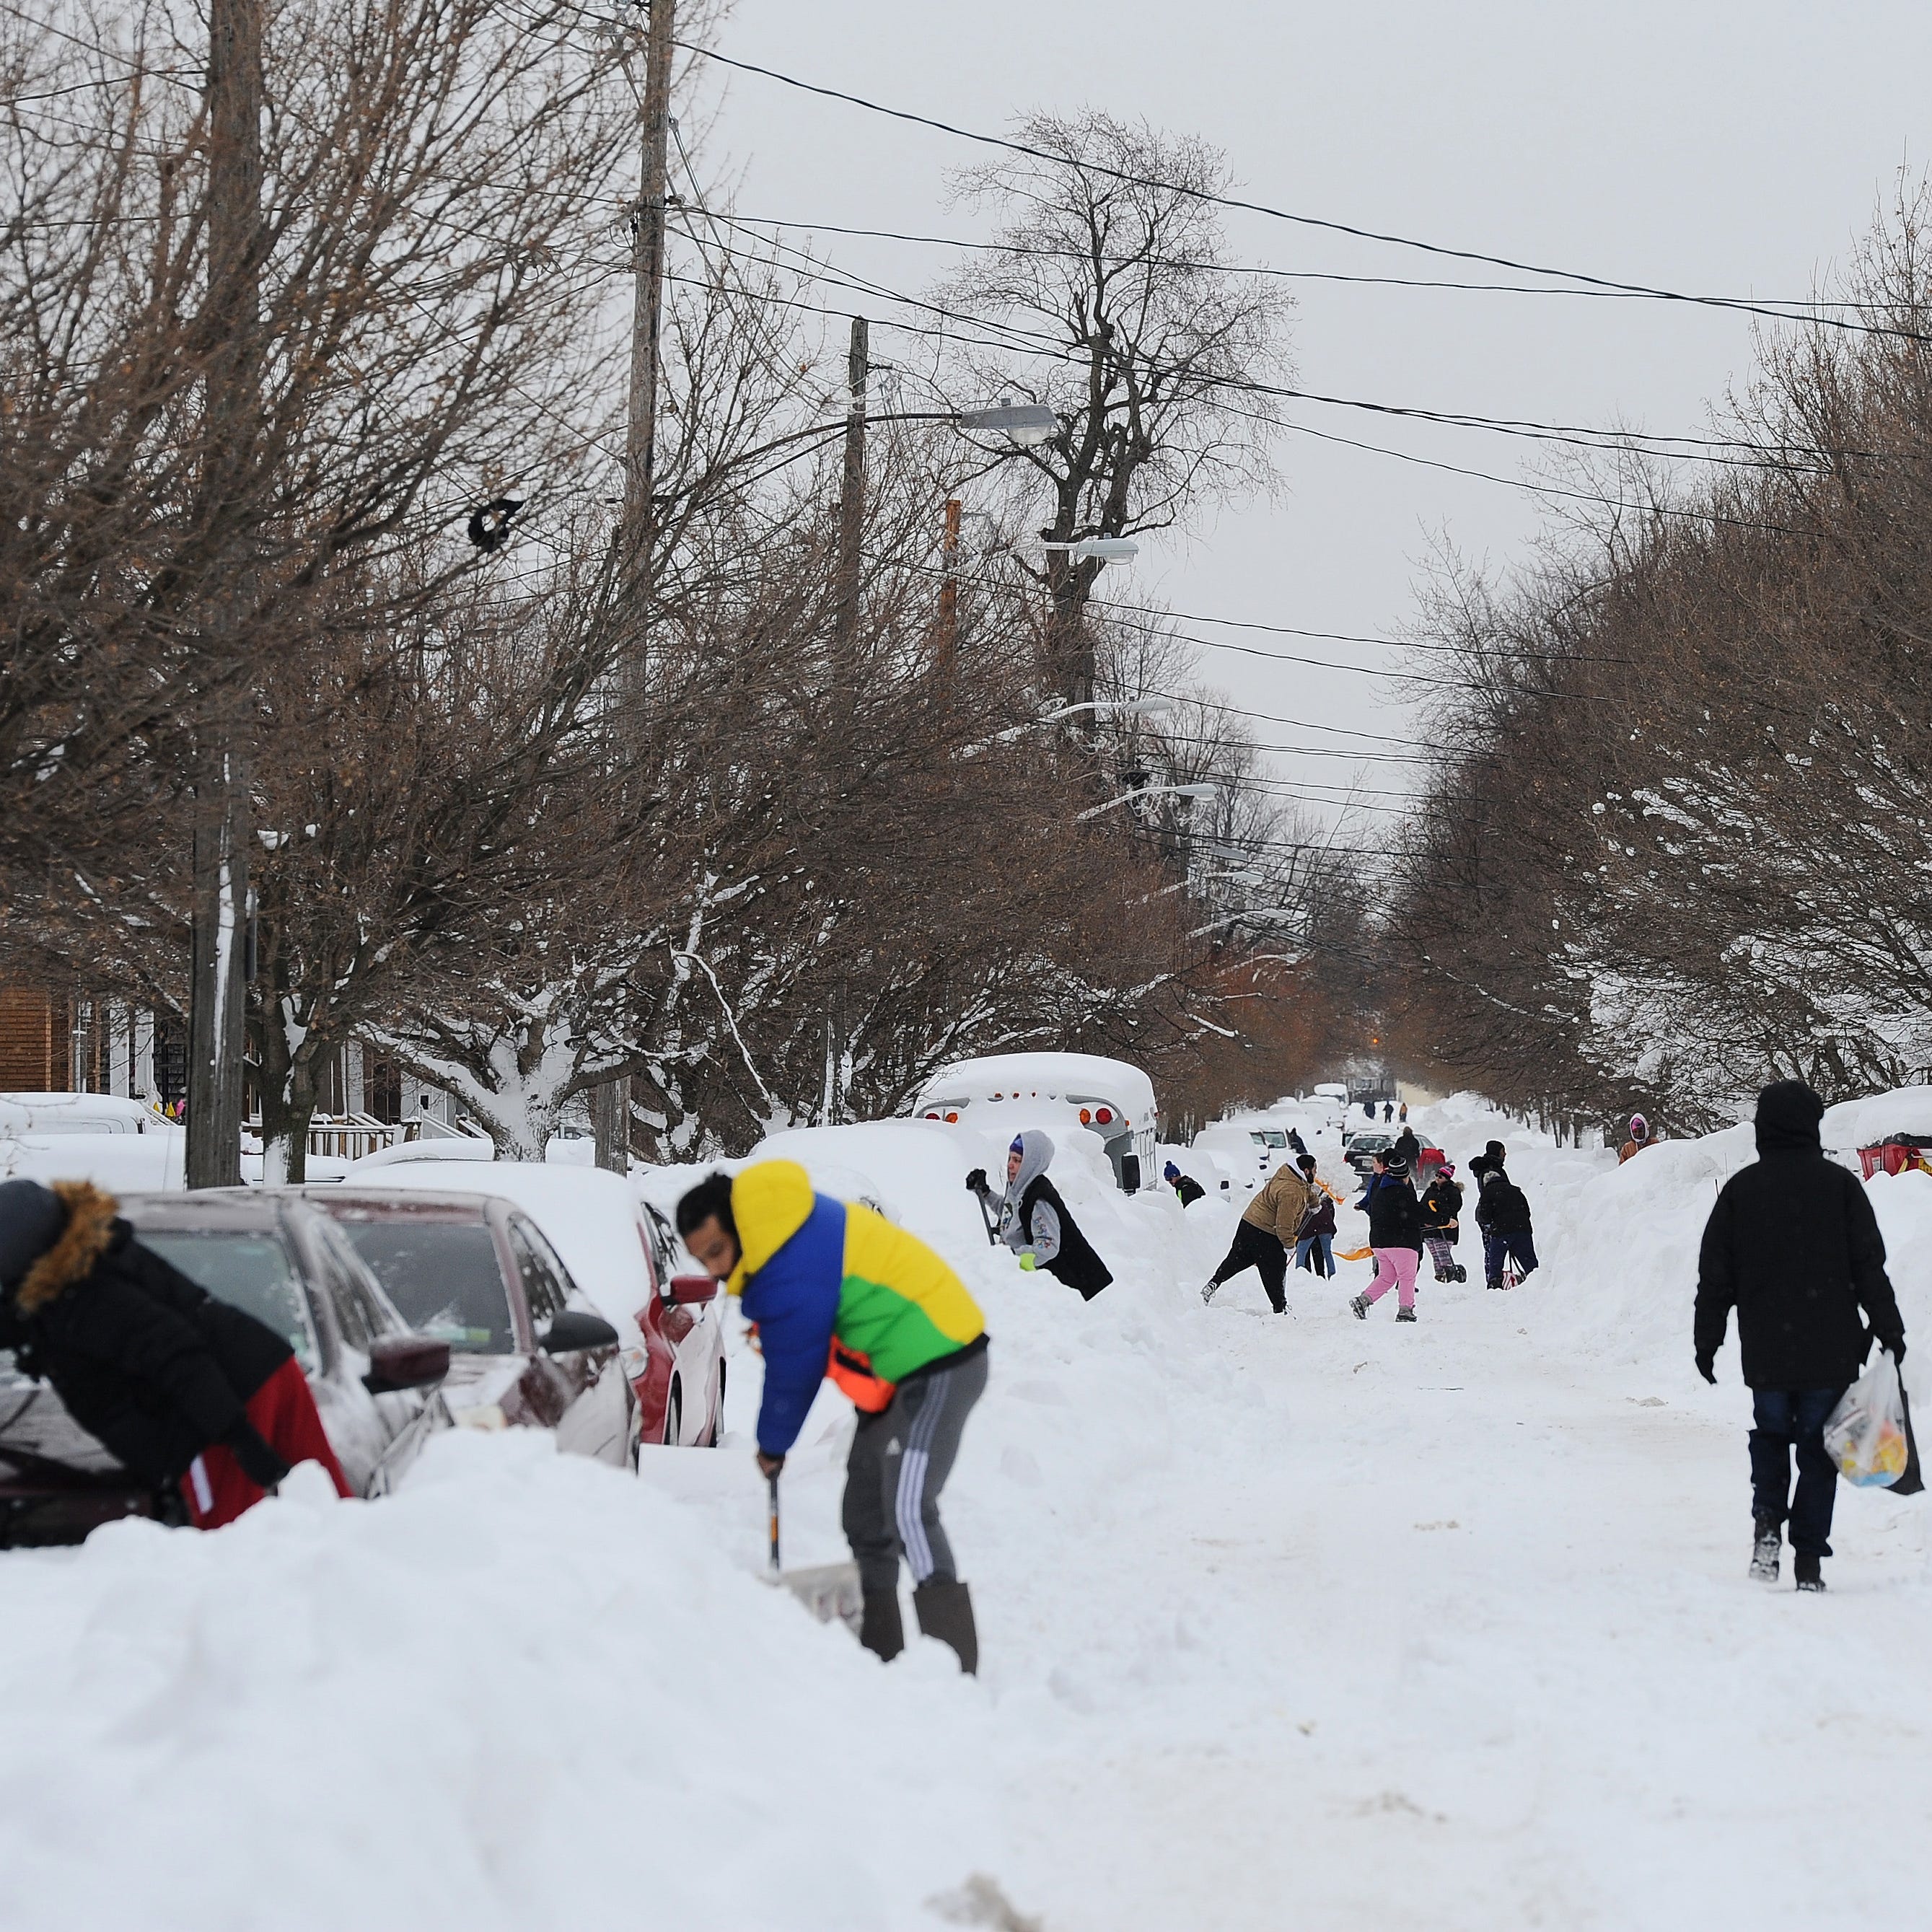 Residents on Woodside Drive clear heavy snow on December 27, 2022 in Buffalo, New York. The historic winter storm Elliott dumped up to four feet of snow, leaving thousands without power and at least 28 confirmed dead in the city of Buffalo and the surrounding suburbs.